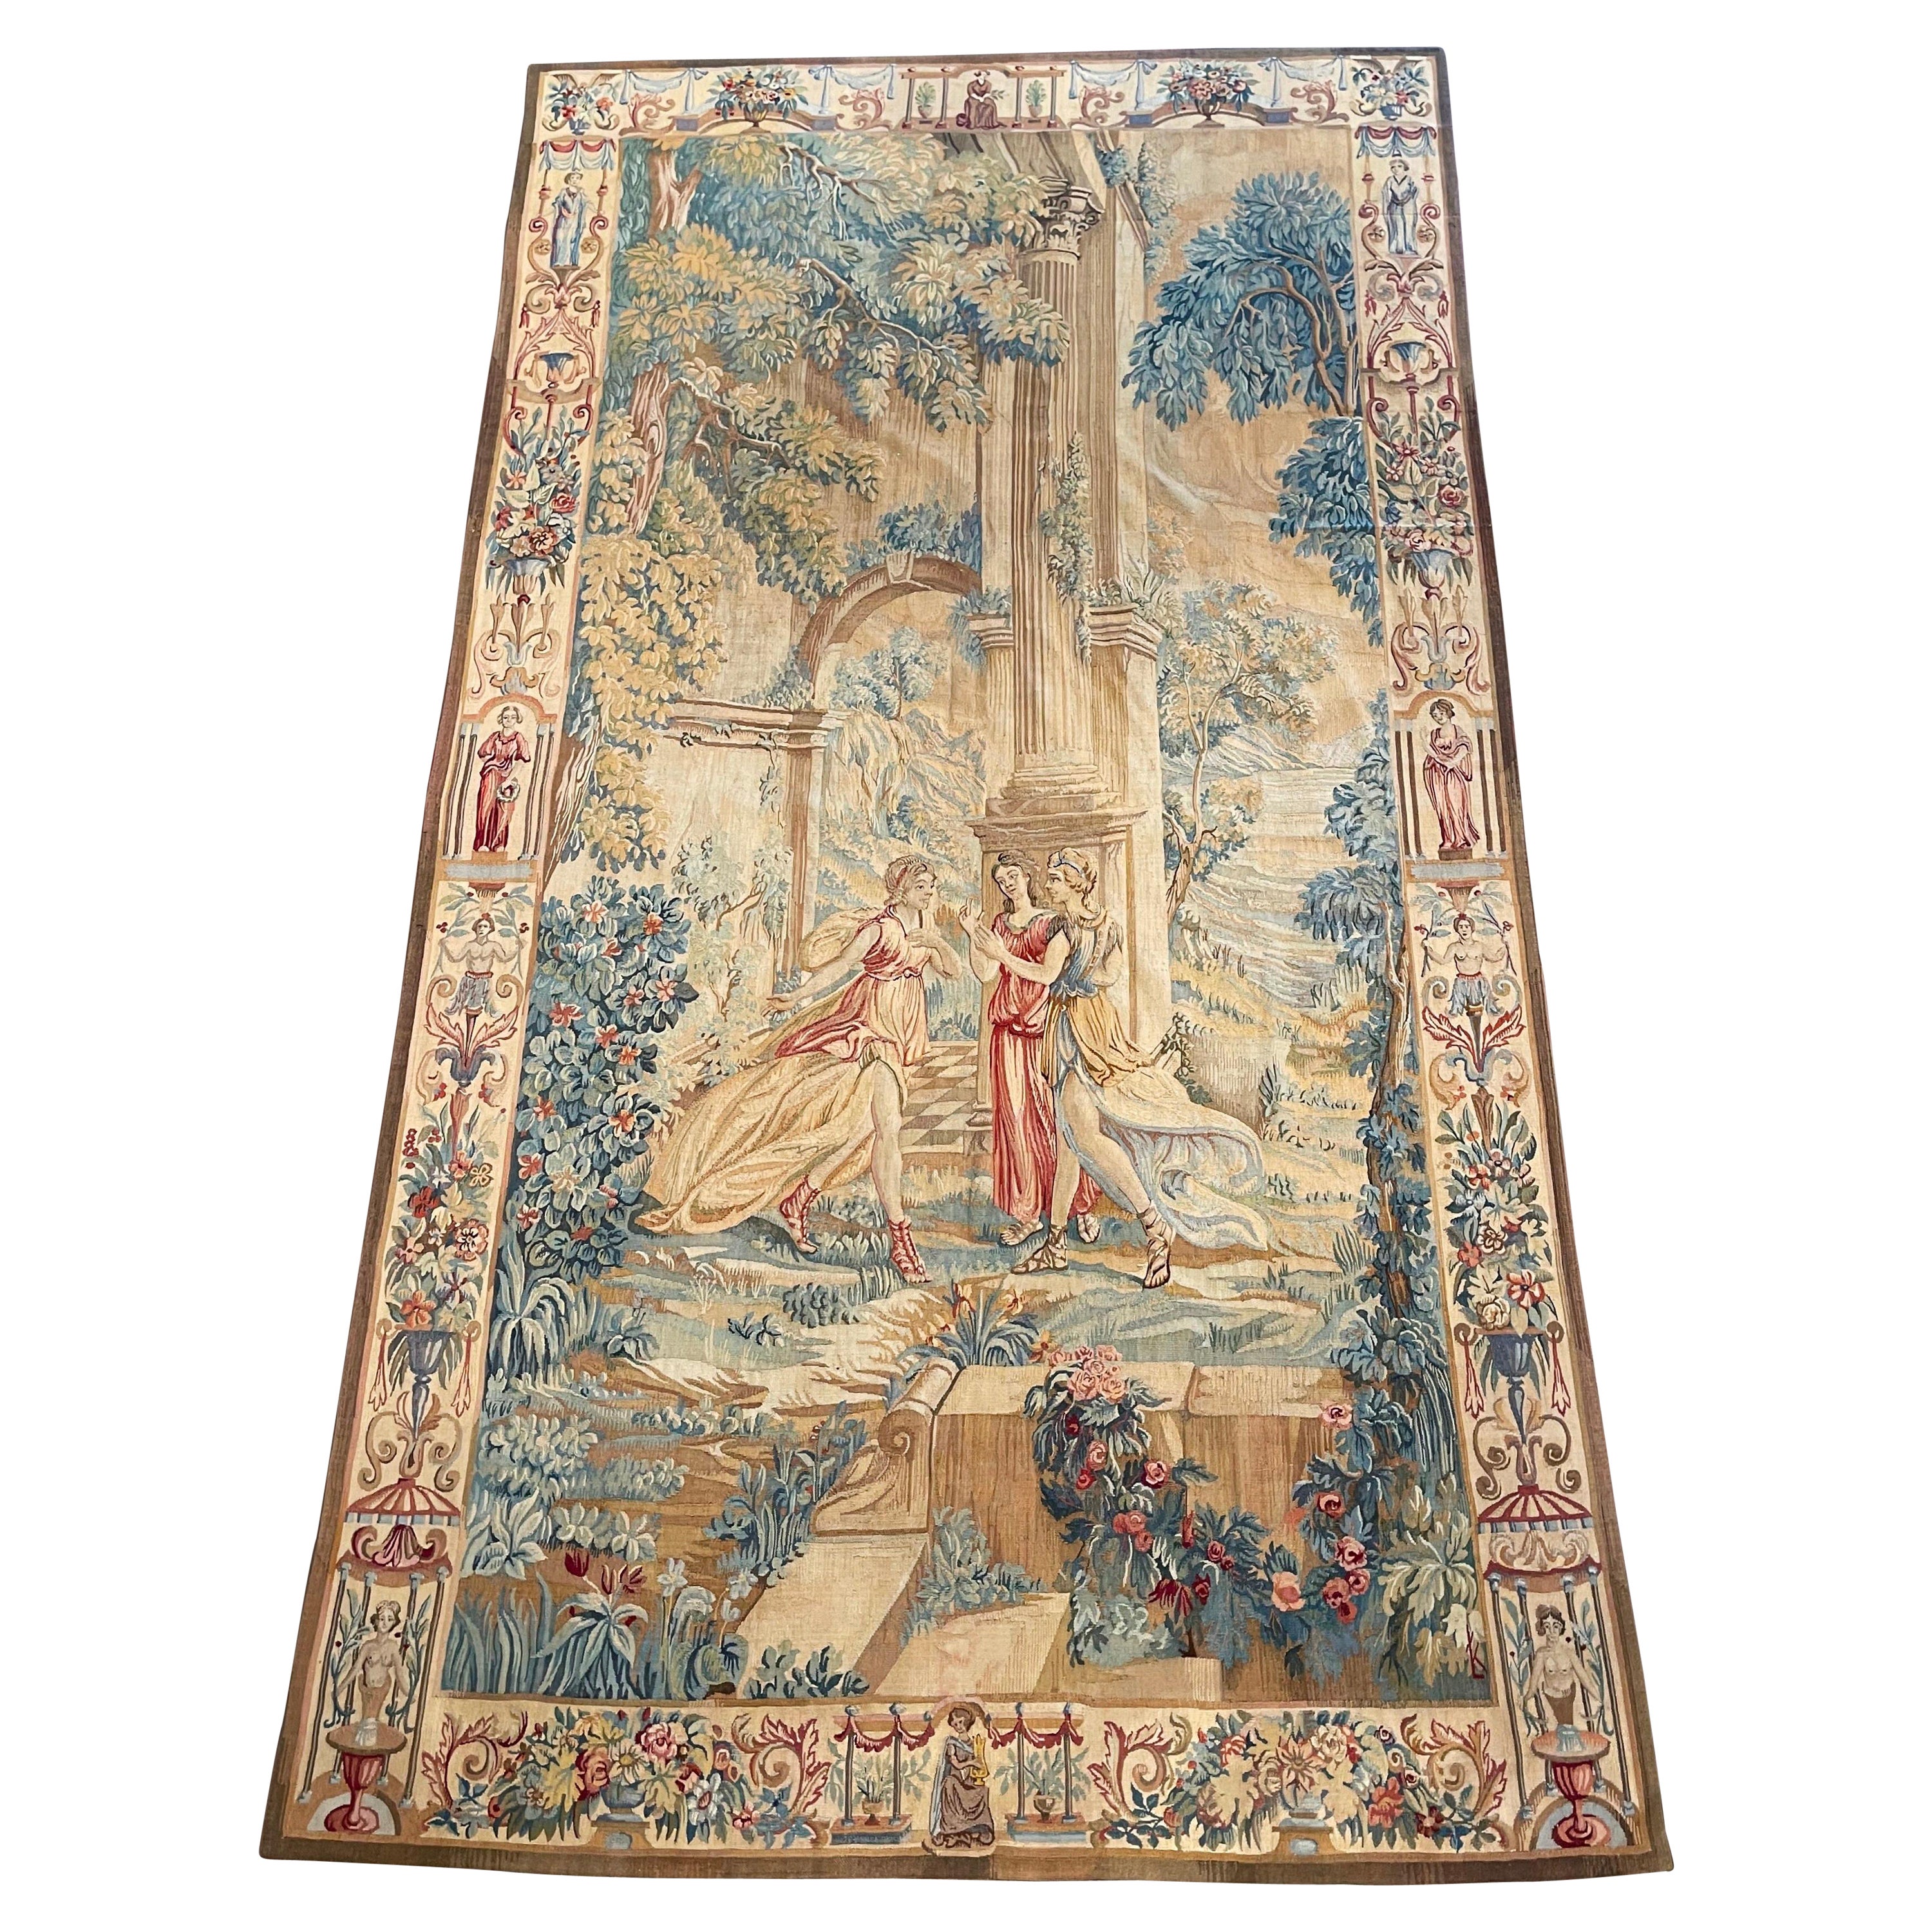 Vintage Hand Woven Neo-Classical Wall Tapestry with Roman Figures and Ruins